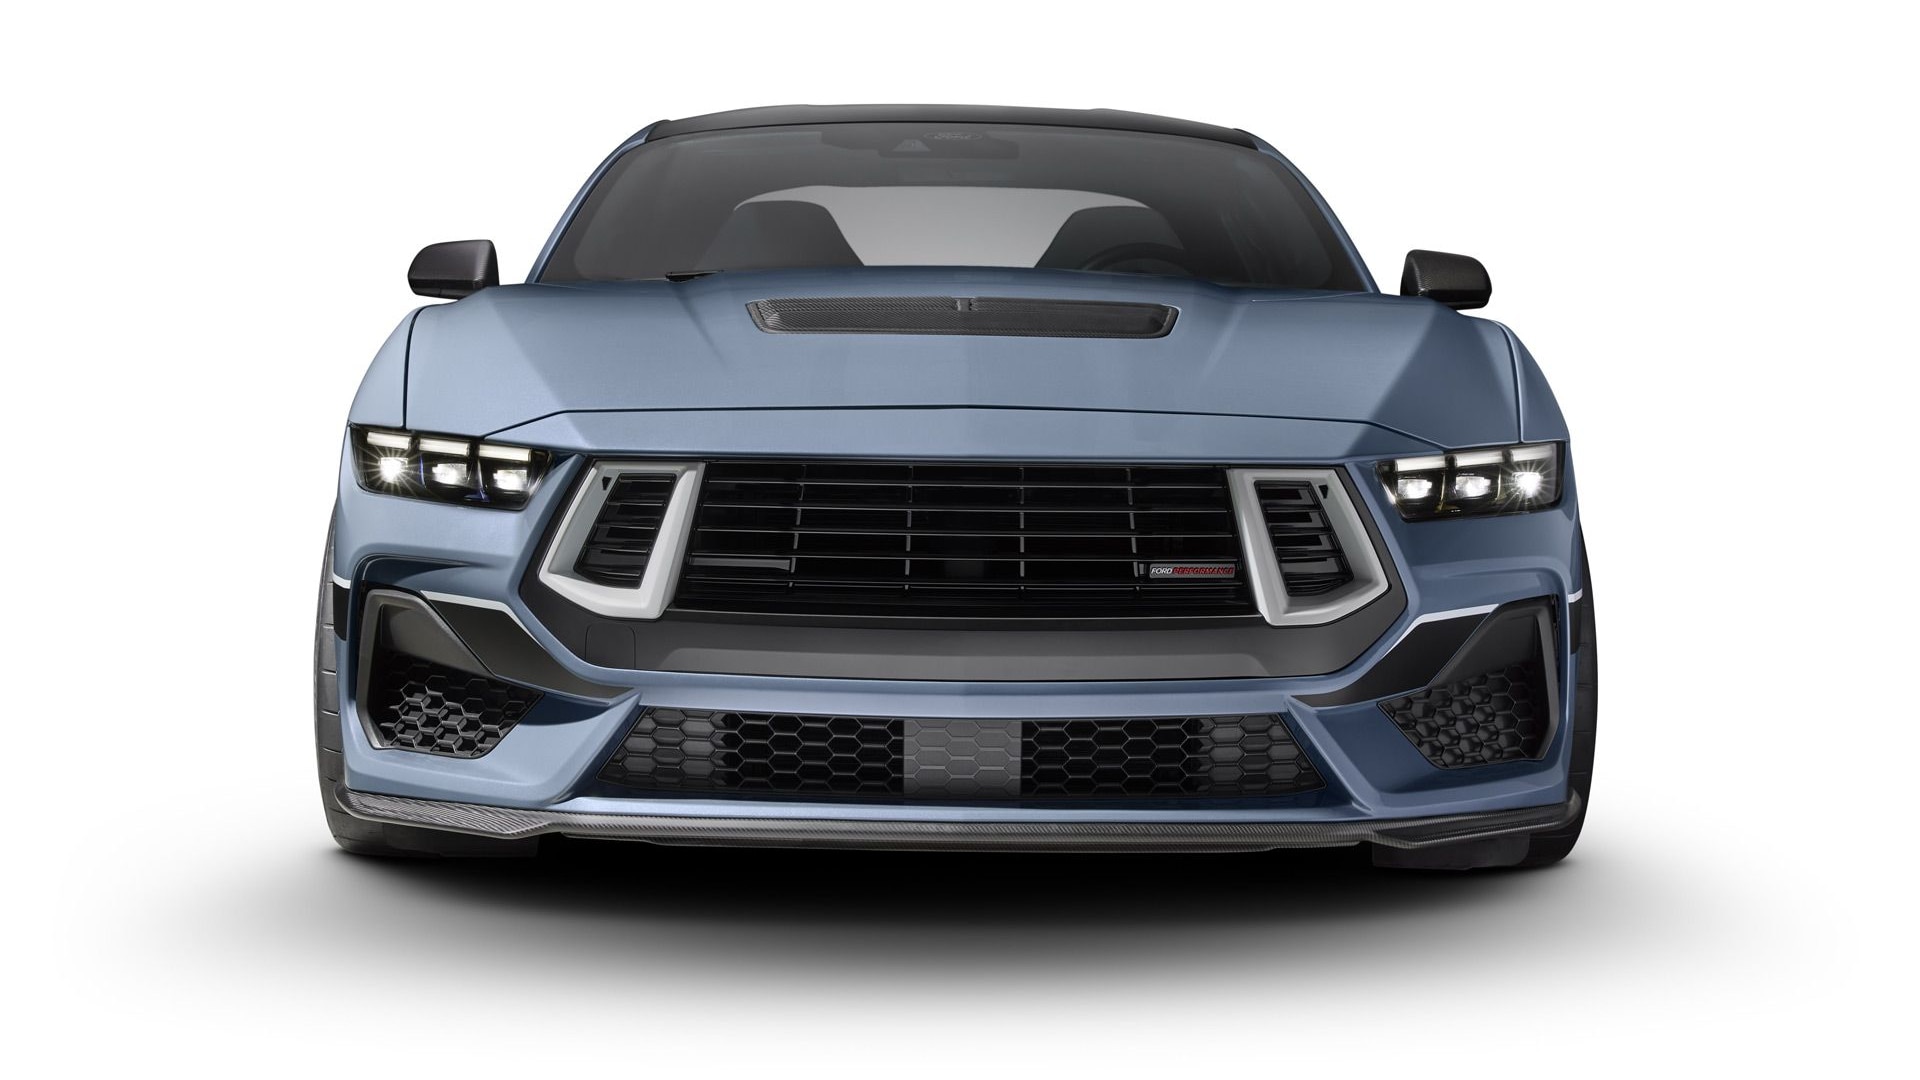 Ford Mustang FP800S concept